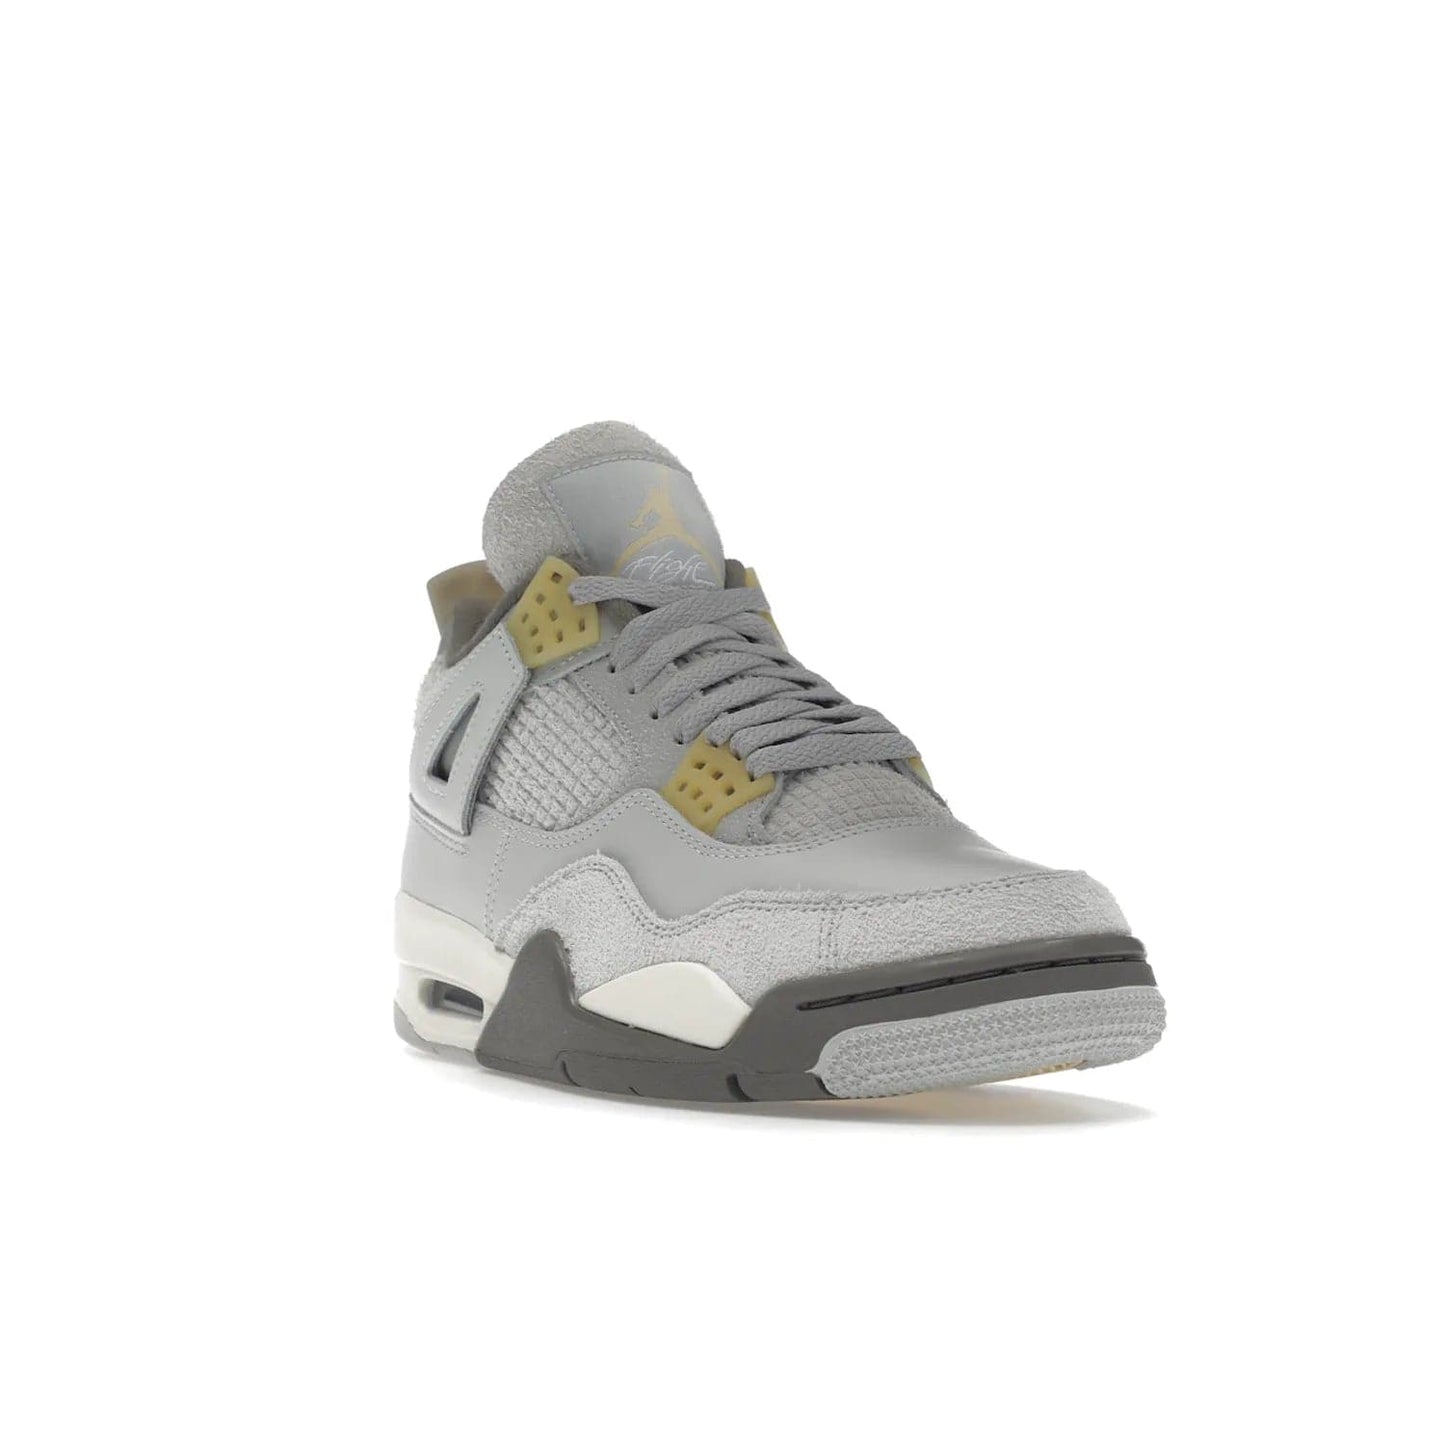 Jordan 4 Retro SE Craft Photon Dust - Image 7 - Only at www.BallersClubKickz.com - Upgrade your shoe collection with the Air Jordan 4 Retro SE Craft Photon Dust. This luxurious sneaker features a combination of suede and leather with unique grey tones like Photon Dust, Pale Vanilla, Off White, Grey Fog, Flat Pewter, and Sail. Available February 11, 2023.